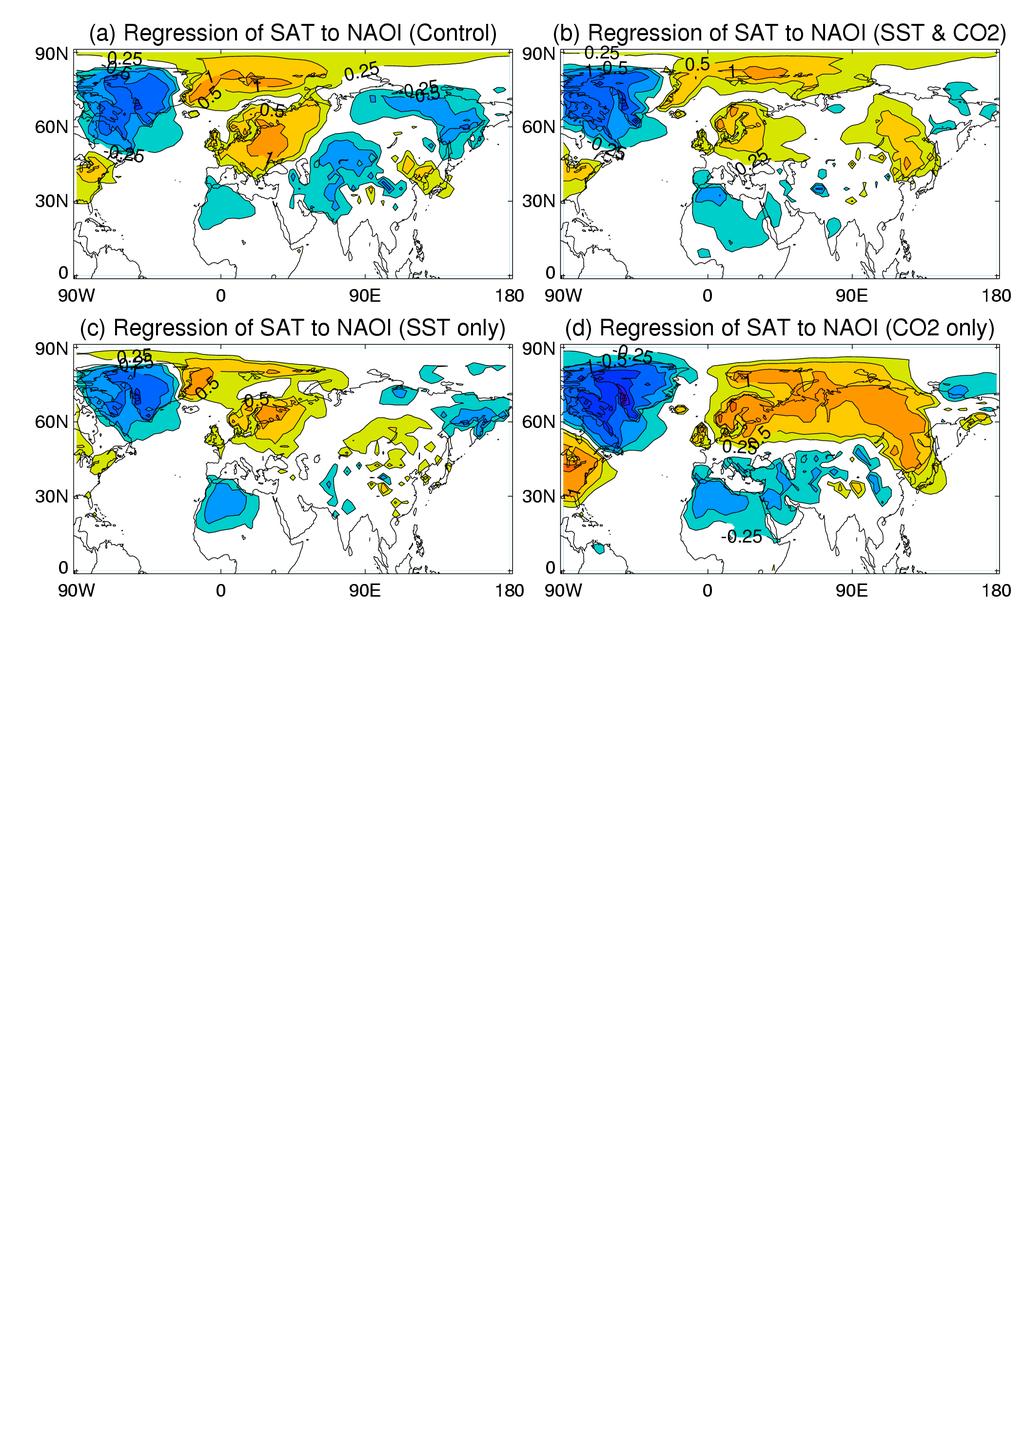 Changes of surface air temperature associated with NAO in response to different forcings Eastward shift of surface air